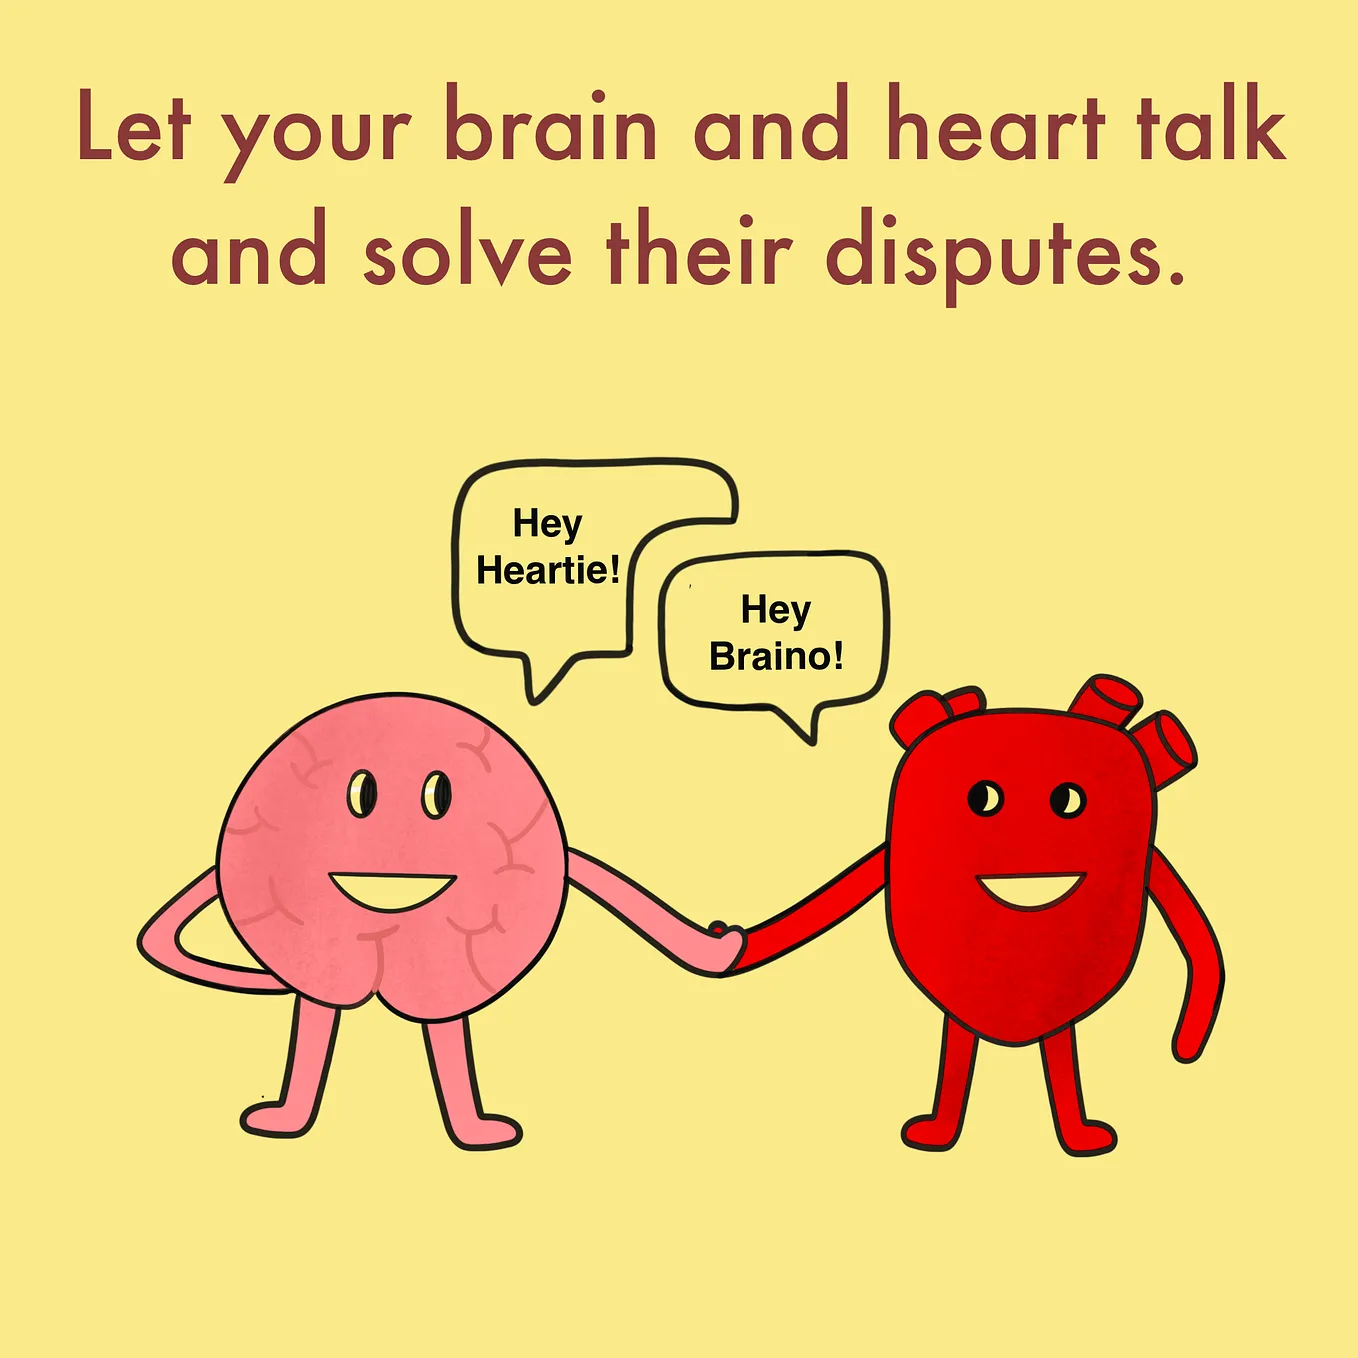 How to achieve harmony between your heart and brain?